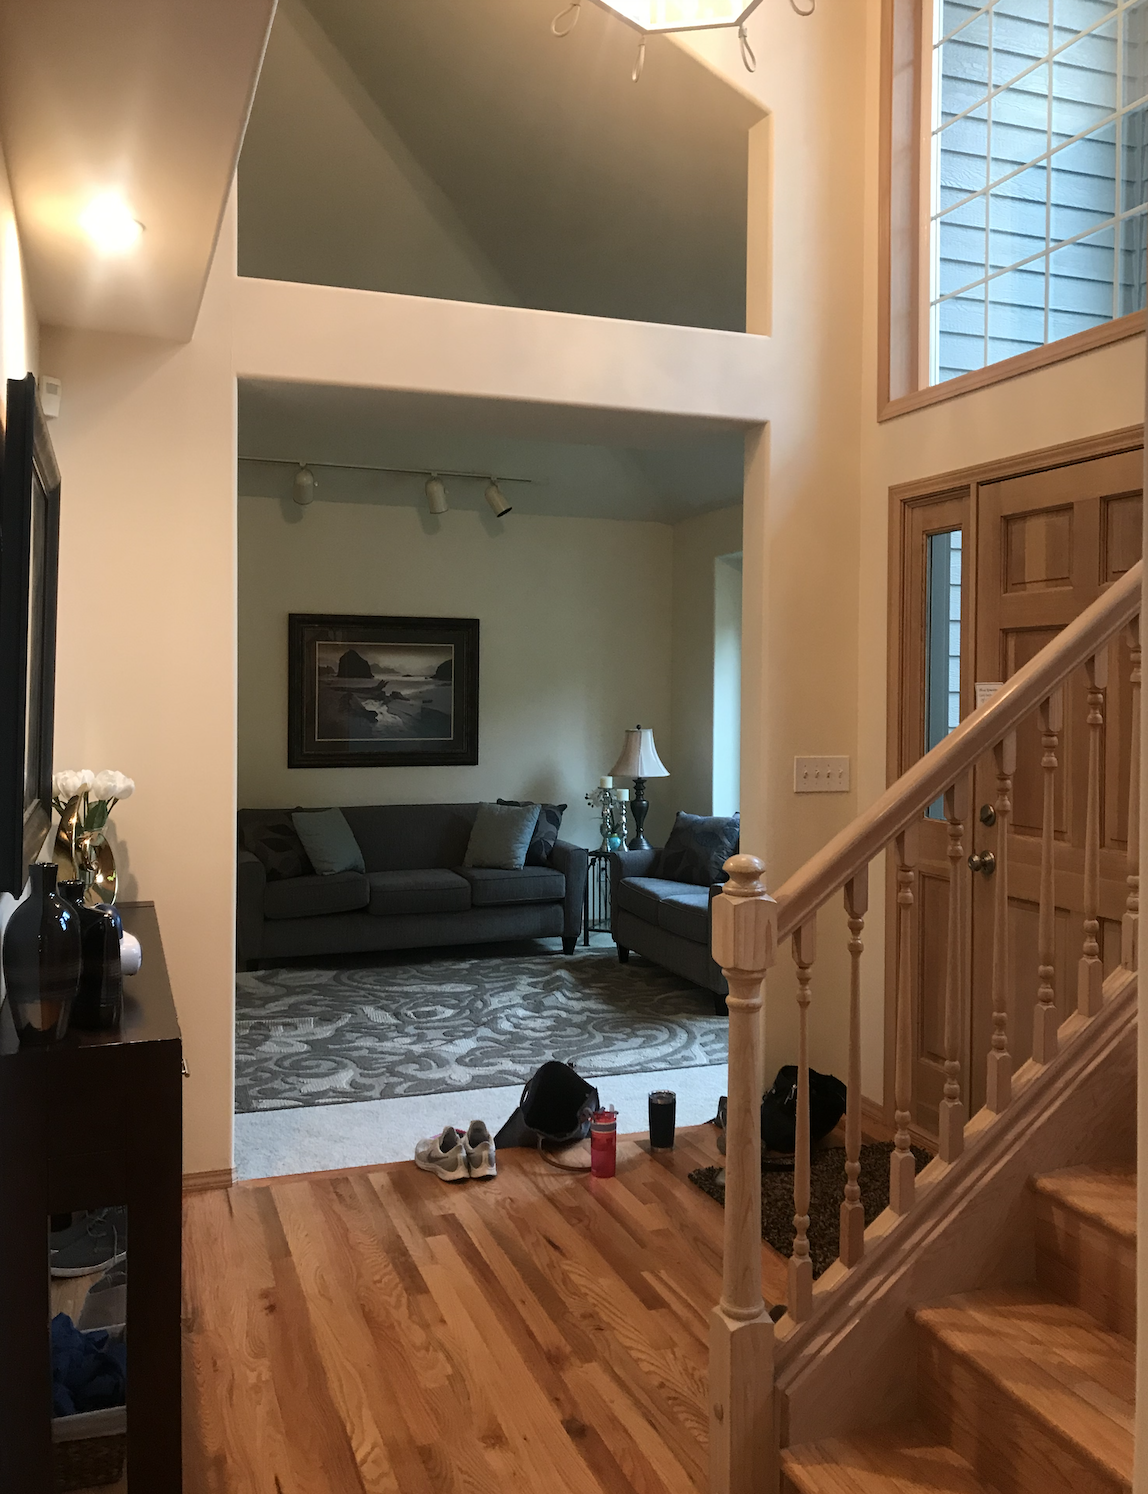 Seattle Interior Design - Before and After